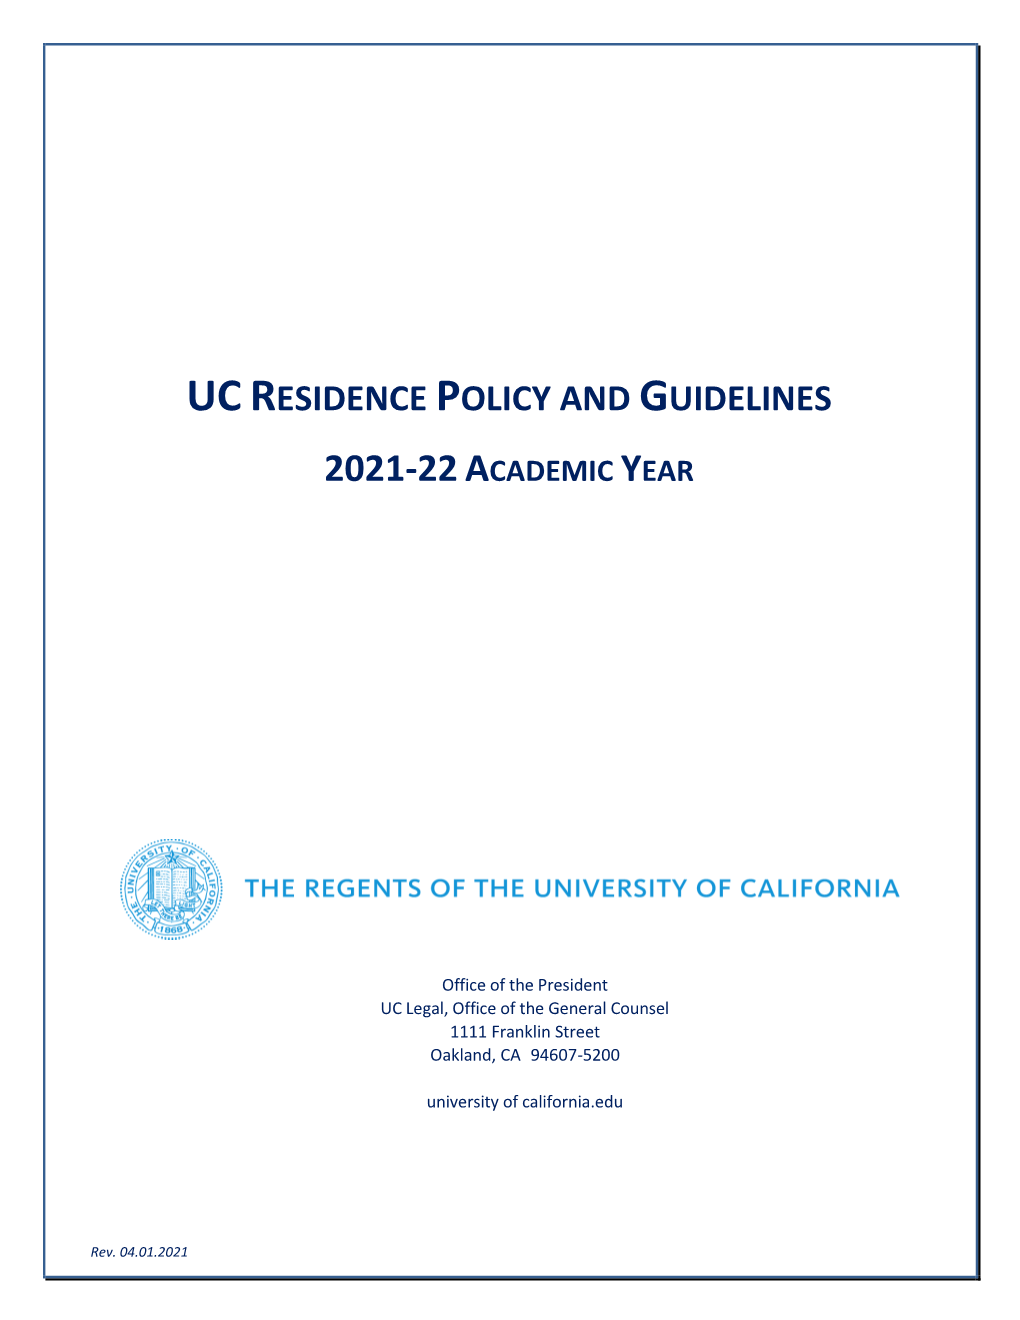 Uc Residence Policy and Guidelines 2021-22 Academic Year